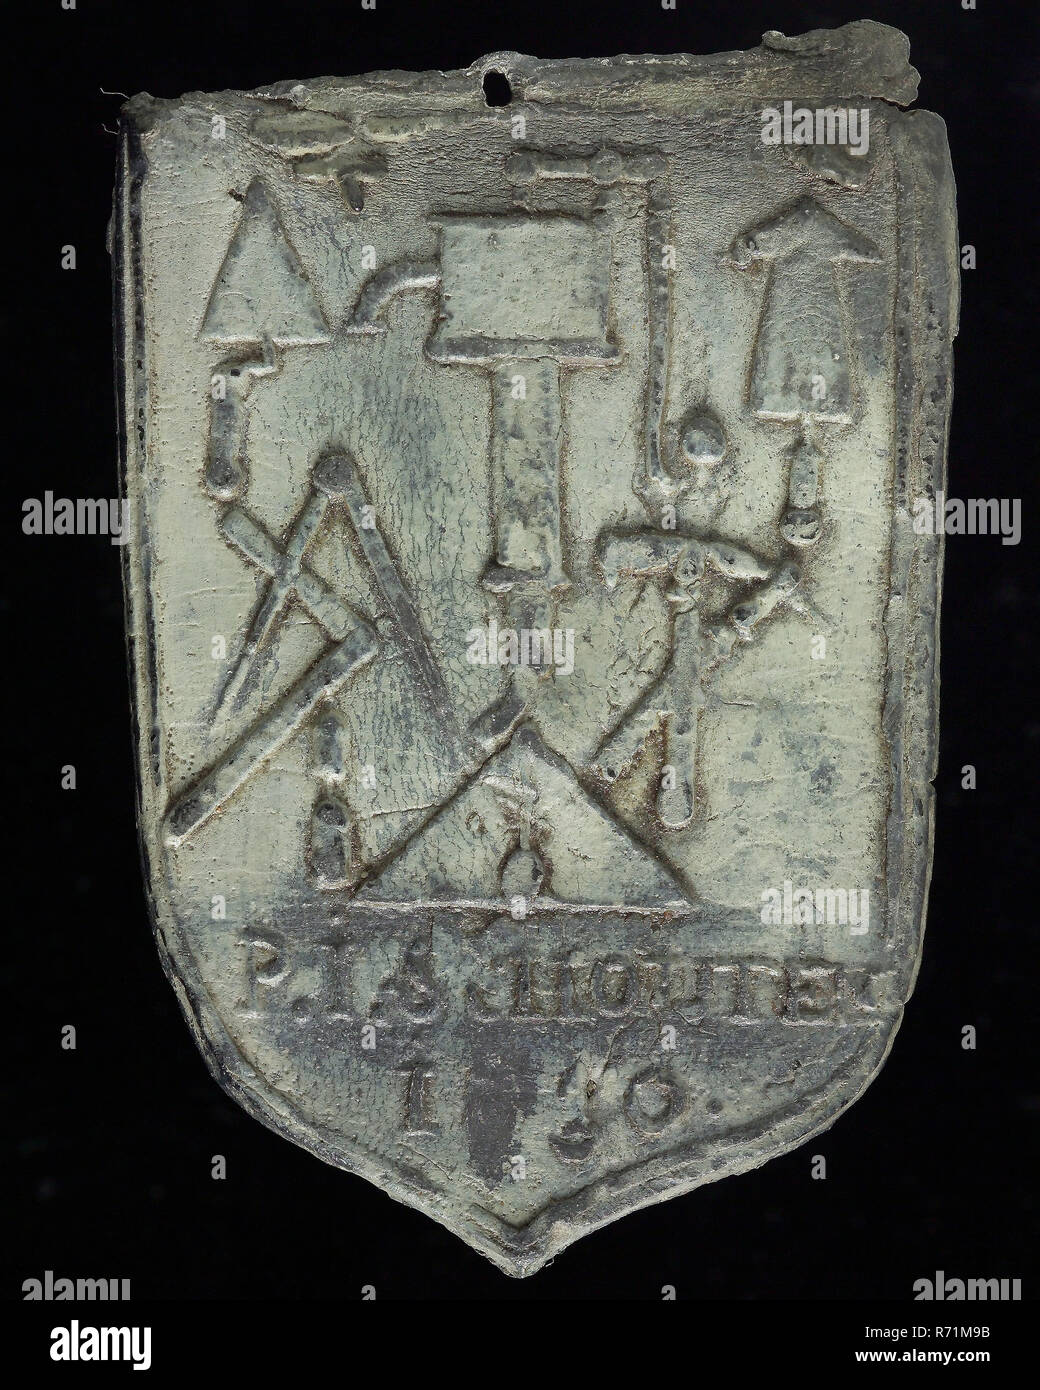 P.I. Schouten, Roof bonnet, shield-shaped cover plate with P.I. Schouten and various leader tools, bollard lead mark lead metal, Roof bonnet shield-shaped cover of the nails with embossed year that can not be deciphered and the name of the plumber P.I. Schouten and above slide tool tools on plate: P.I. Schouten 1 ?? 0 lead Stock Photo